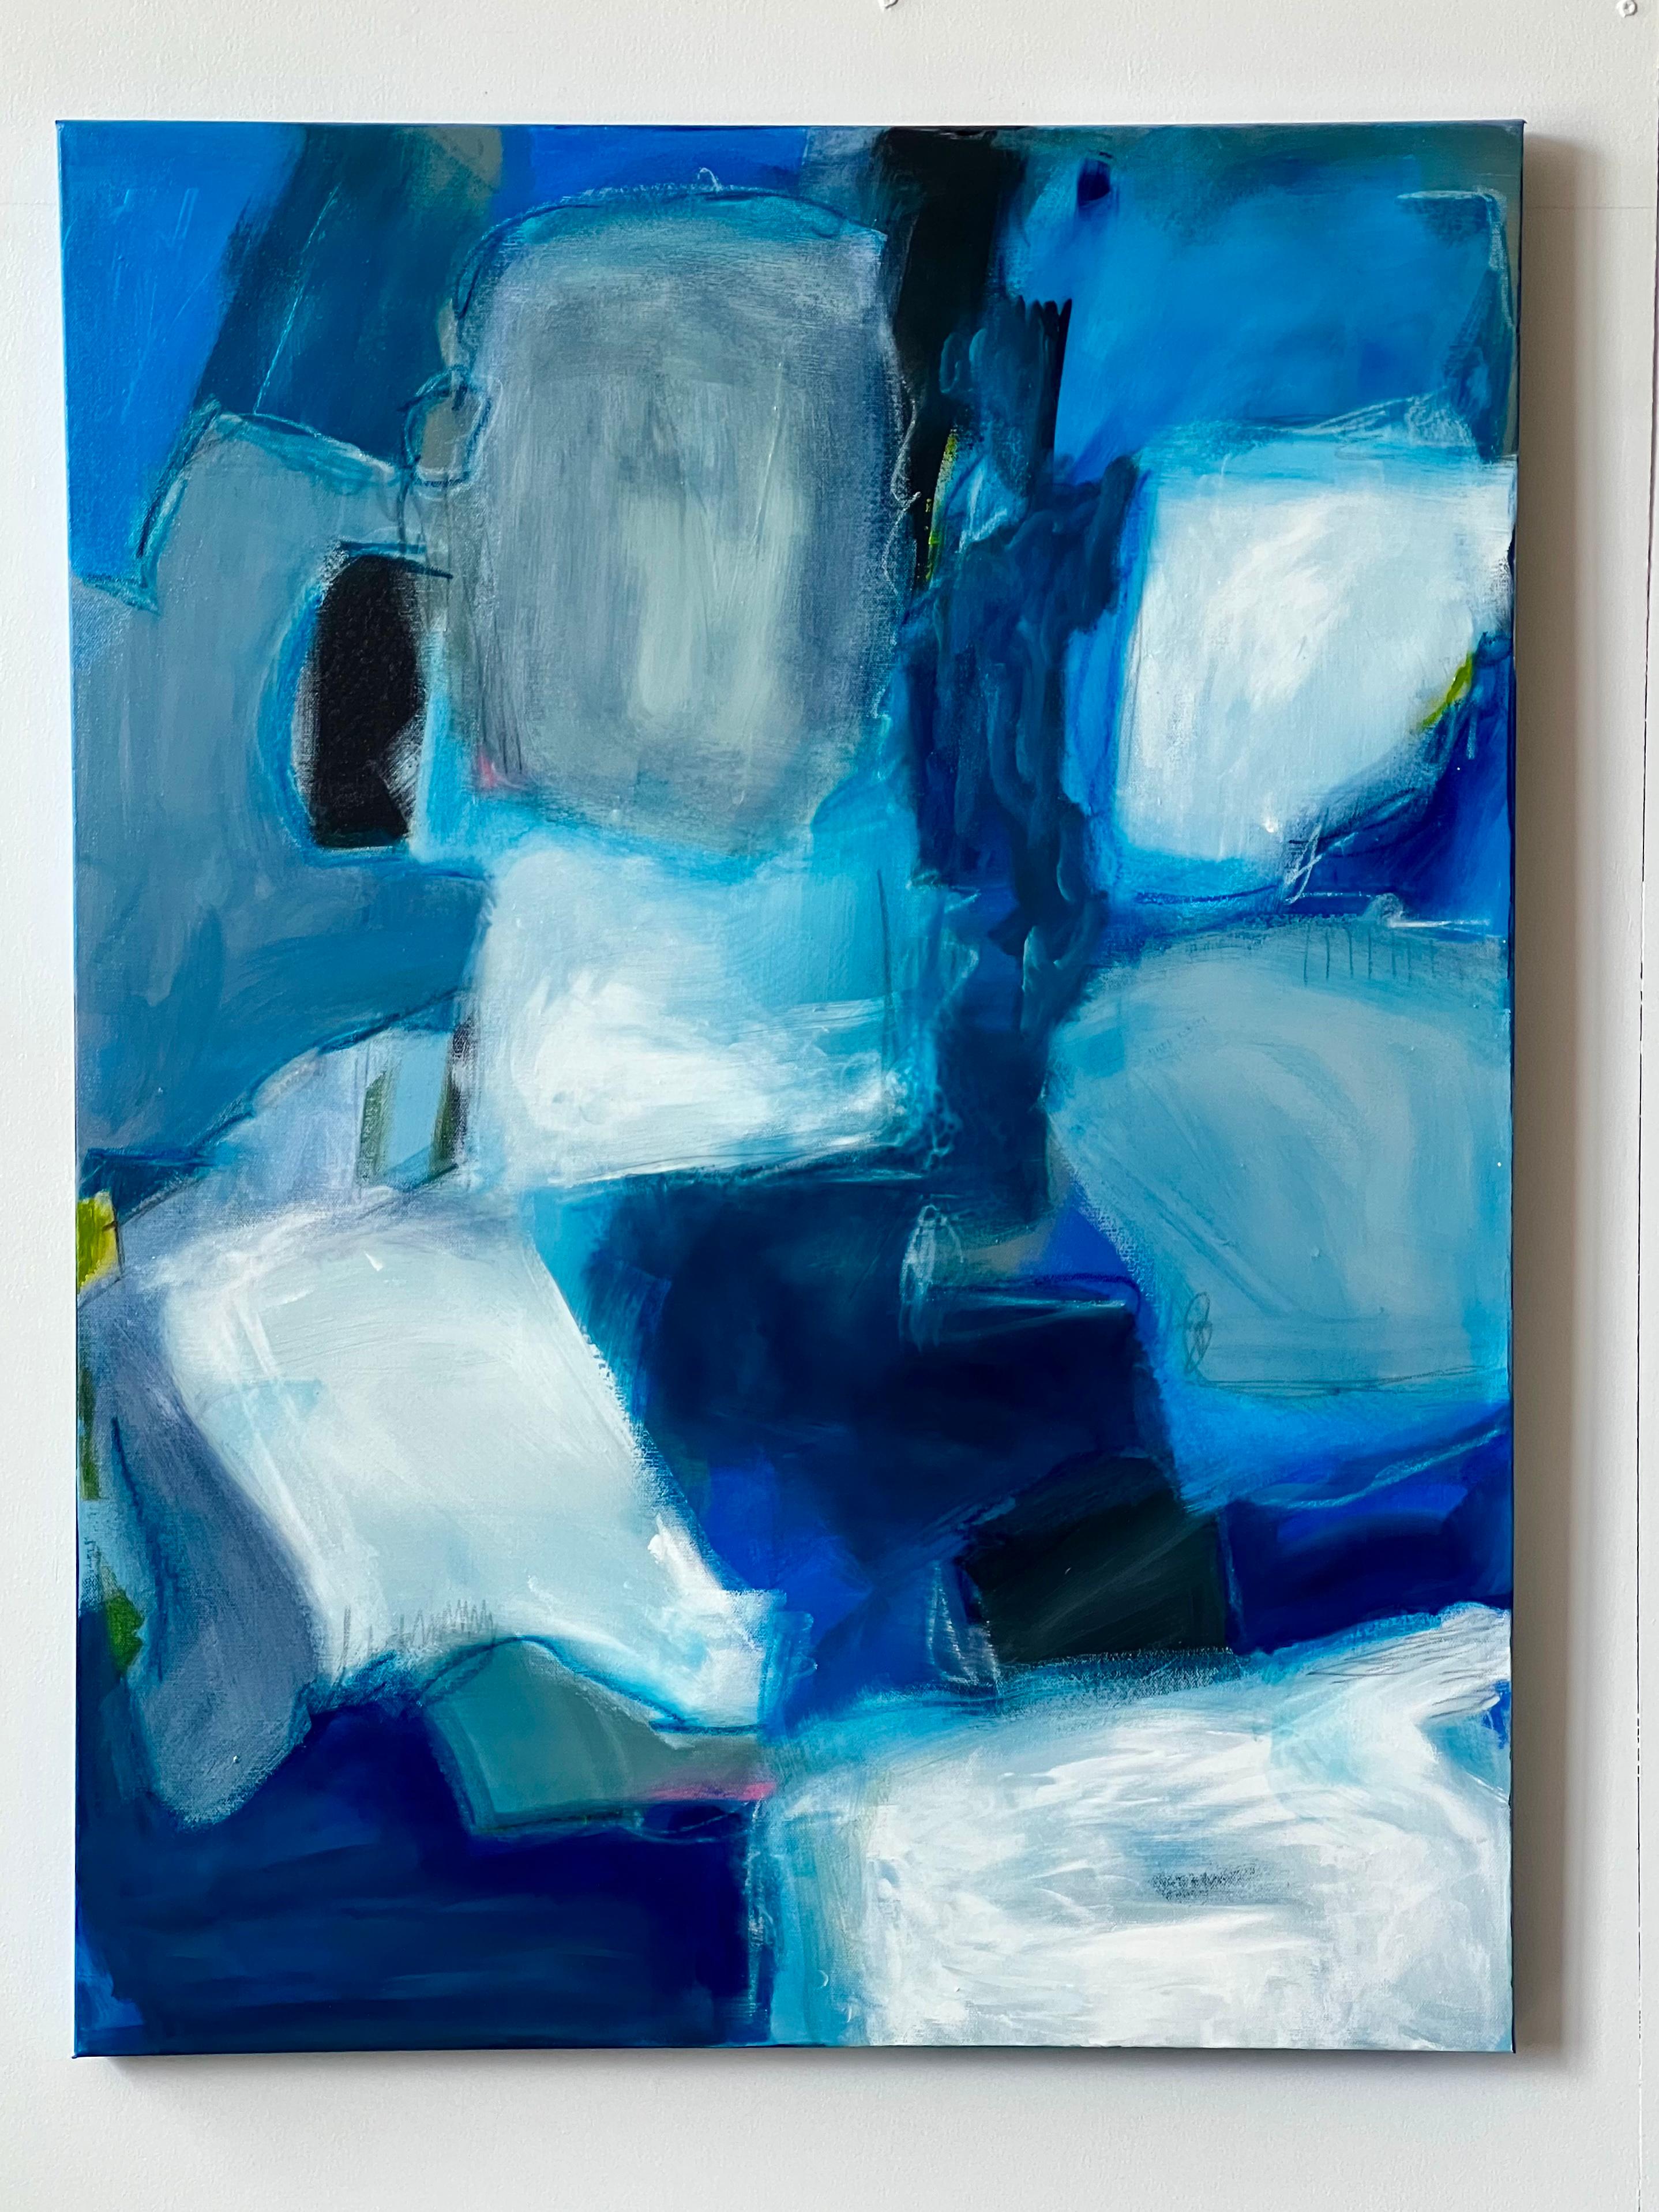 Kelley Carman
Deep Thoughts (Abstract, Blues, Blue Hues, Light Blue, Navy Blue, Glowing)
Acrylic and Oil Stick
Year: 2023
Size: 40x30x1.5in
Signed
COA provided 
Ref.: 924802-2041

Tags: Abstract, Blues, Blue Hues, Light Blue, Navy Blue, Glowing  